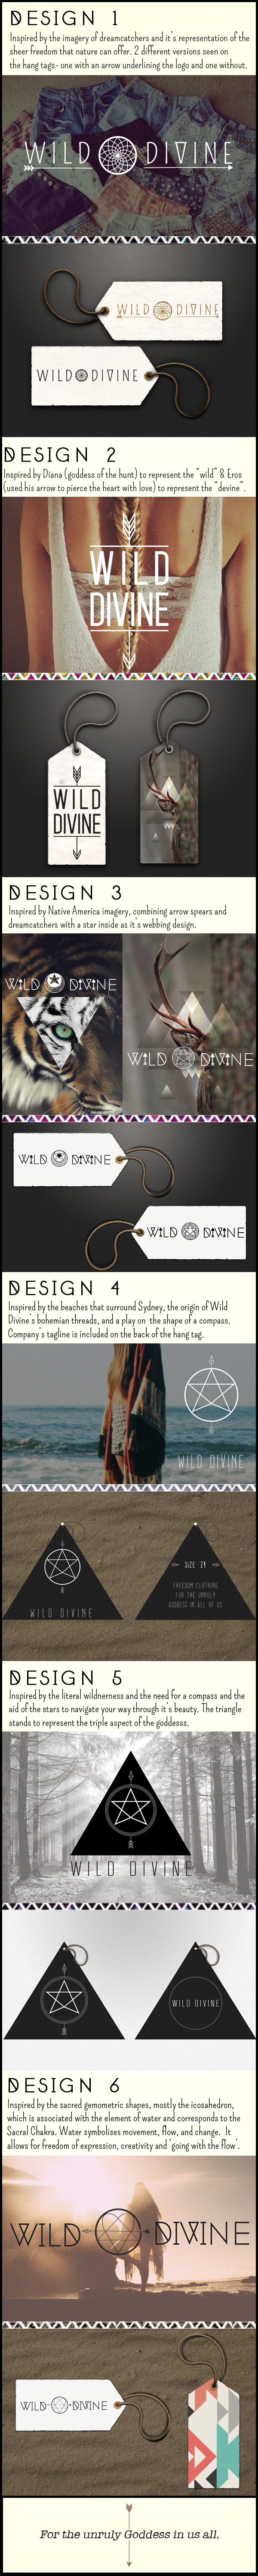 women Clothing goddess vintage native american Patterns arrow Hipster geometric shapes Nature inspiration hang tag Dream Catcher symbols